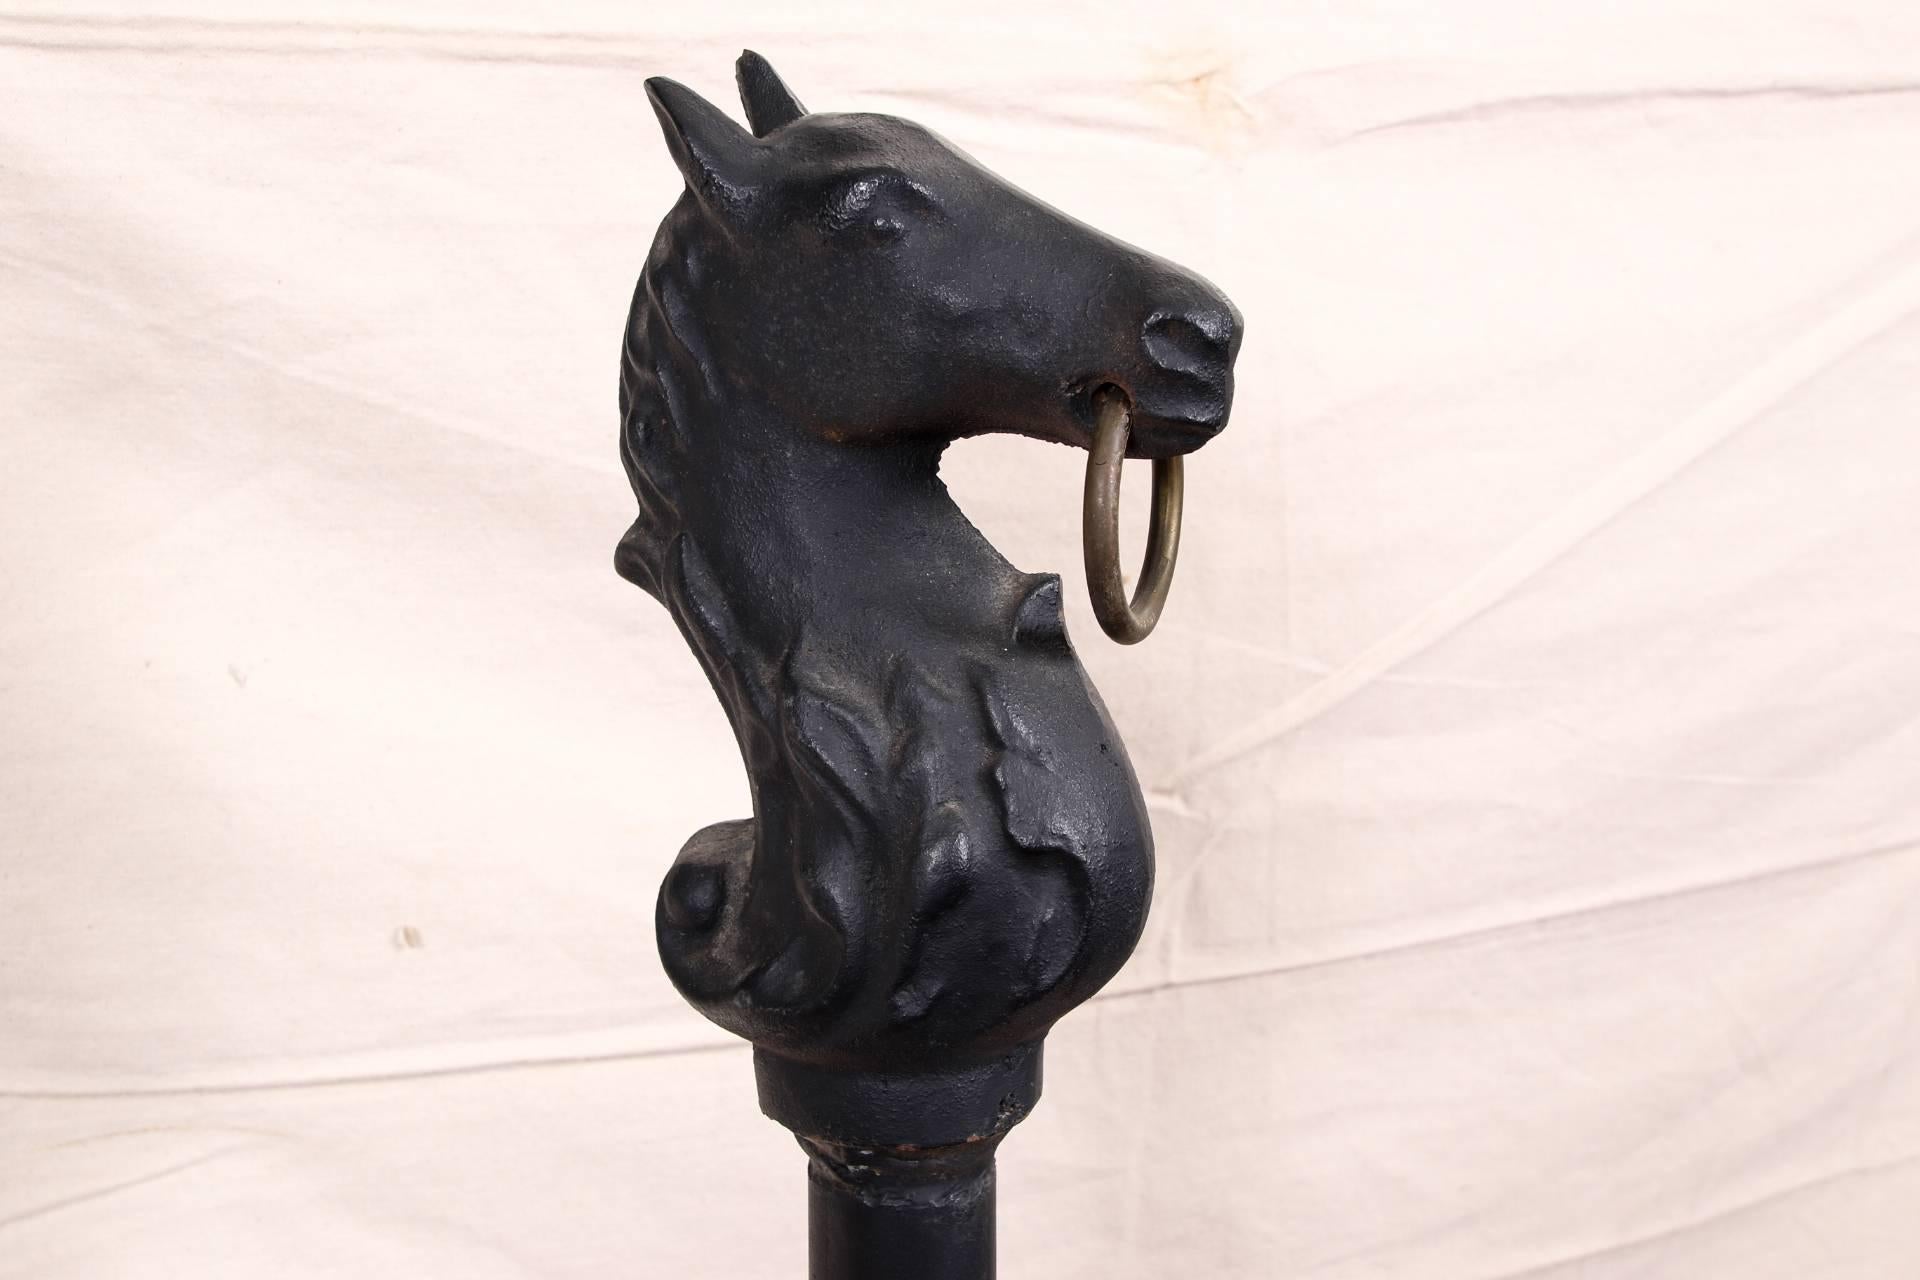 concrete hitching post